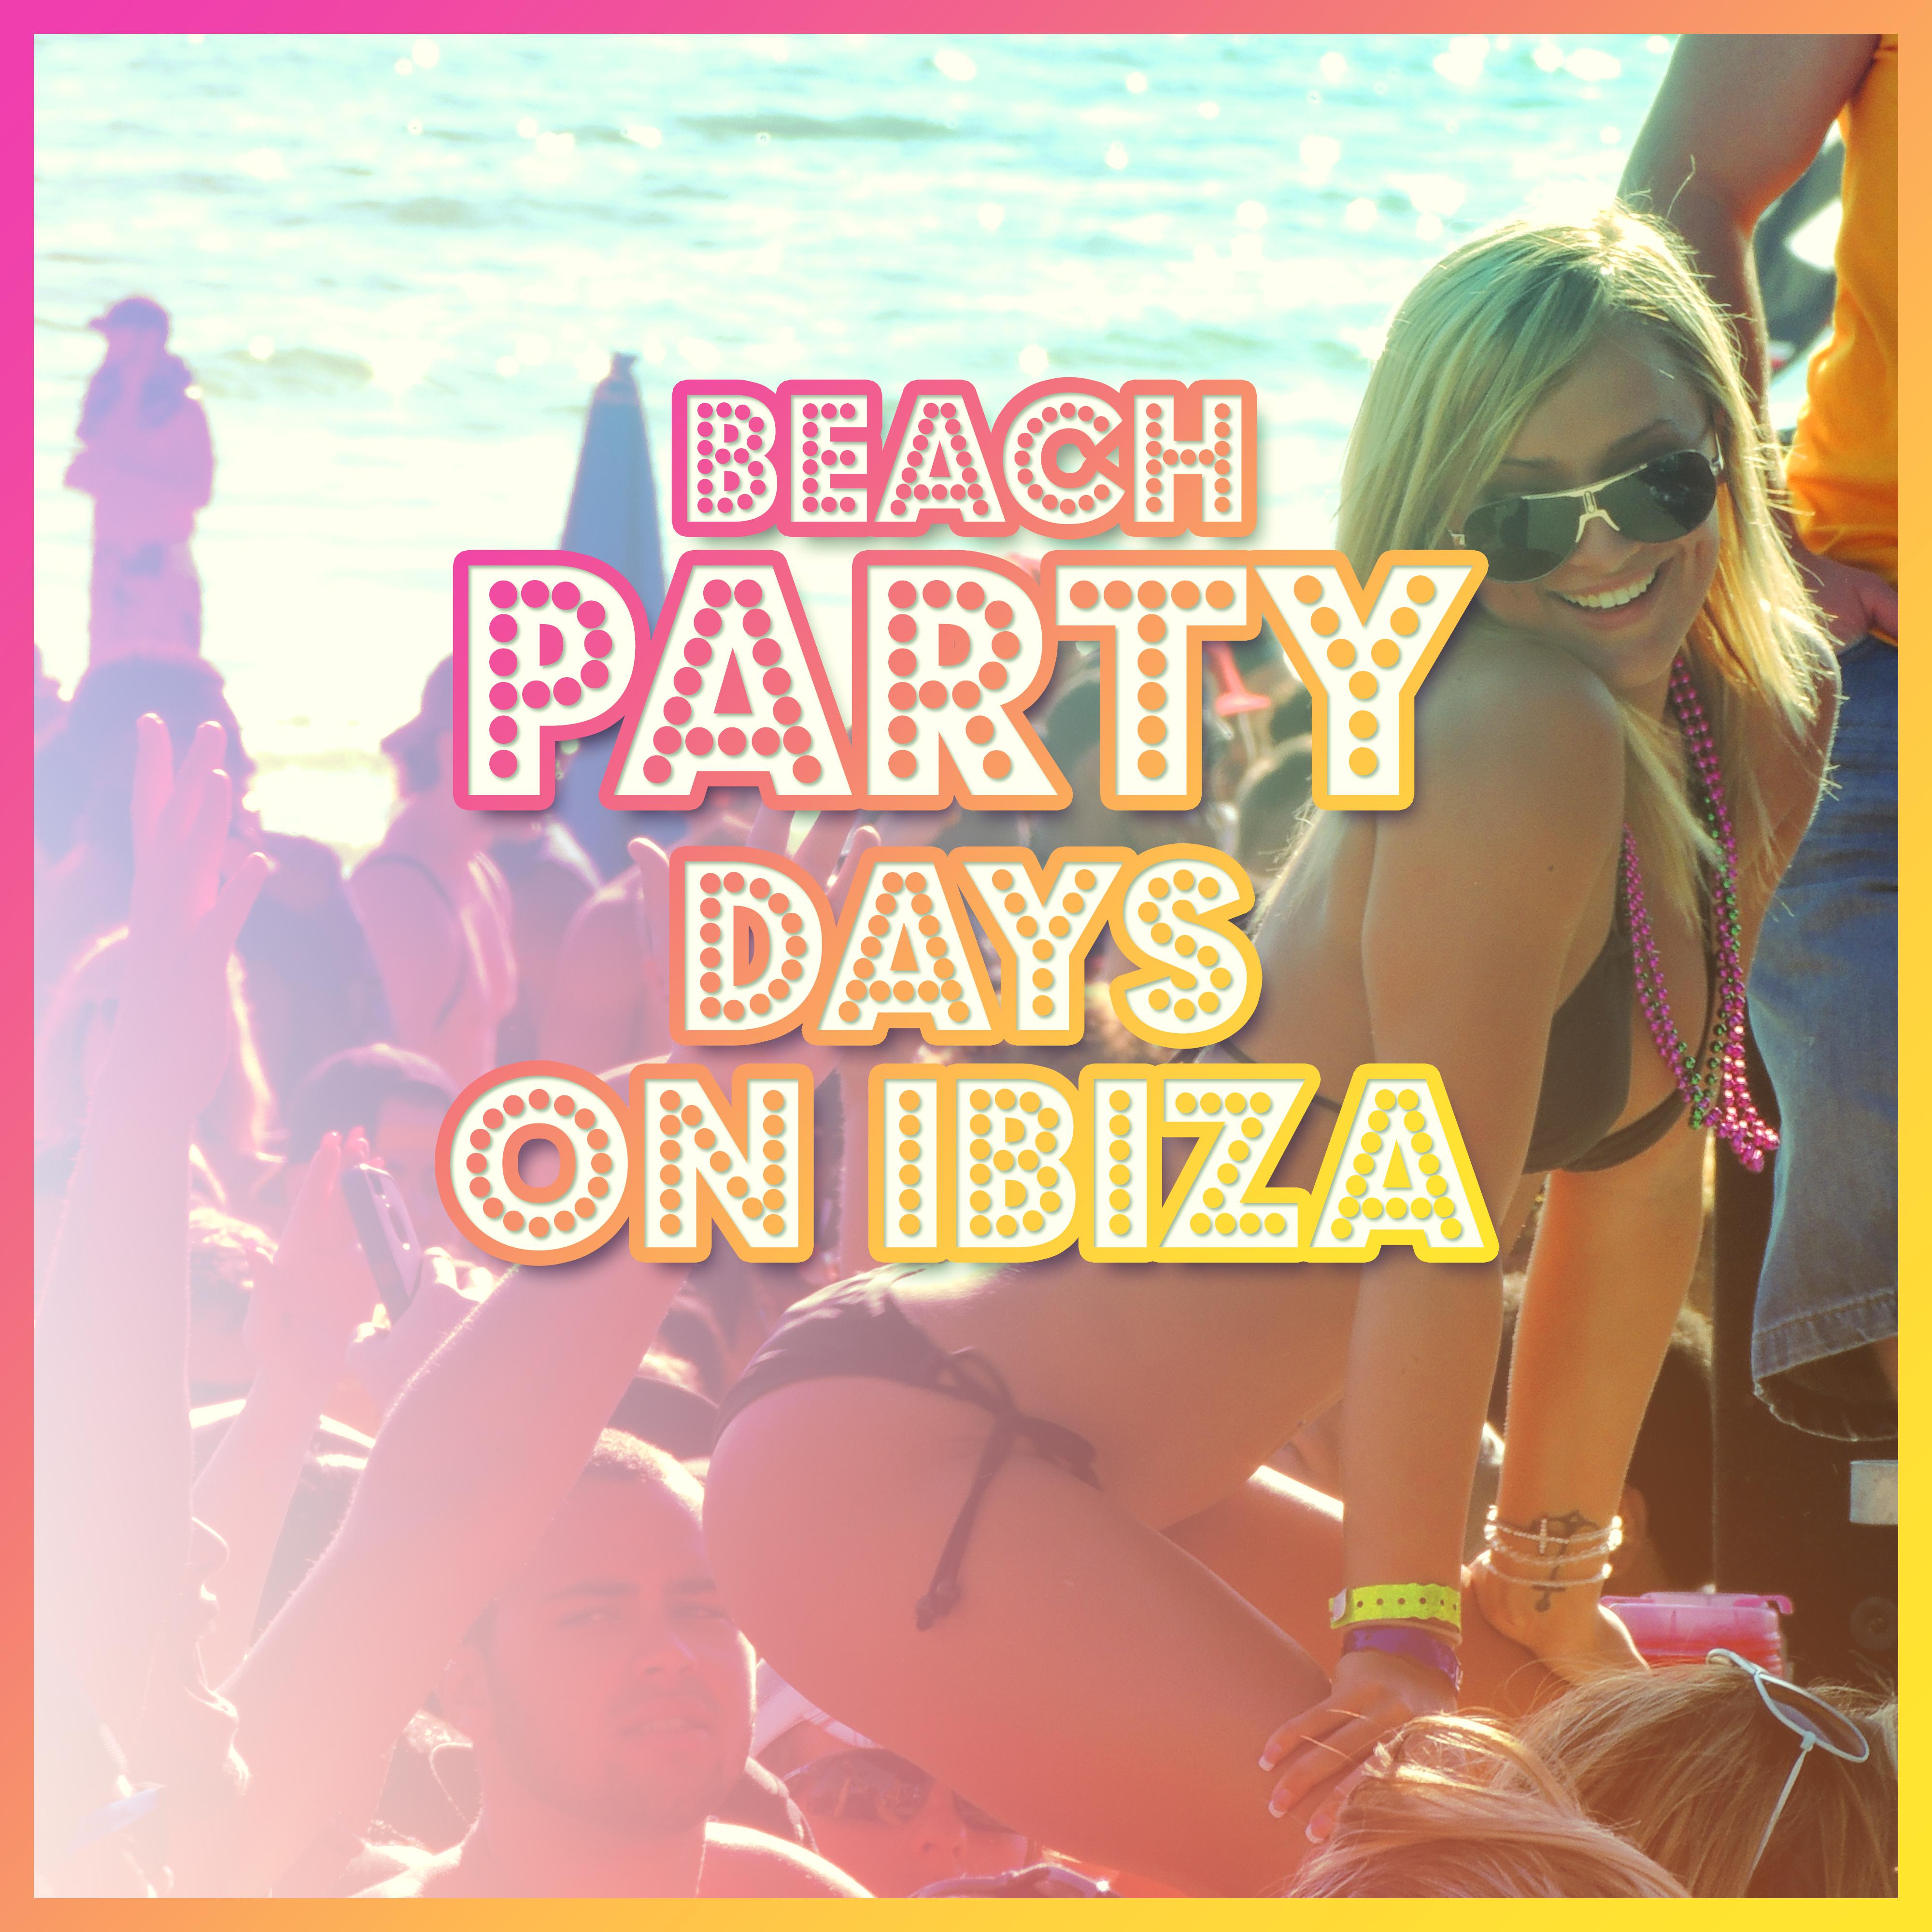 Beach Party Days on Ibiza: 15 Fresh 2019 Chillout Party Beats